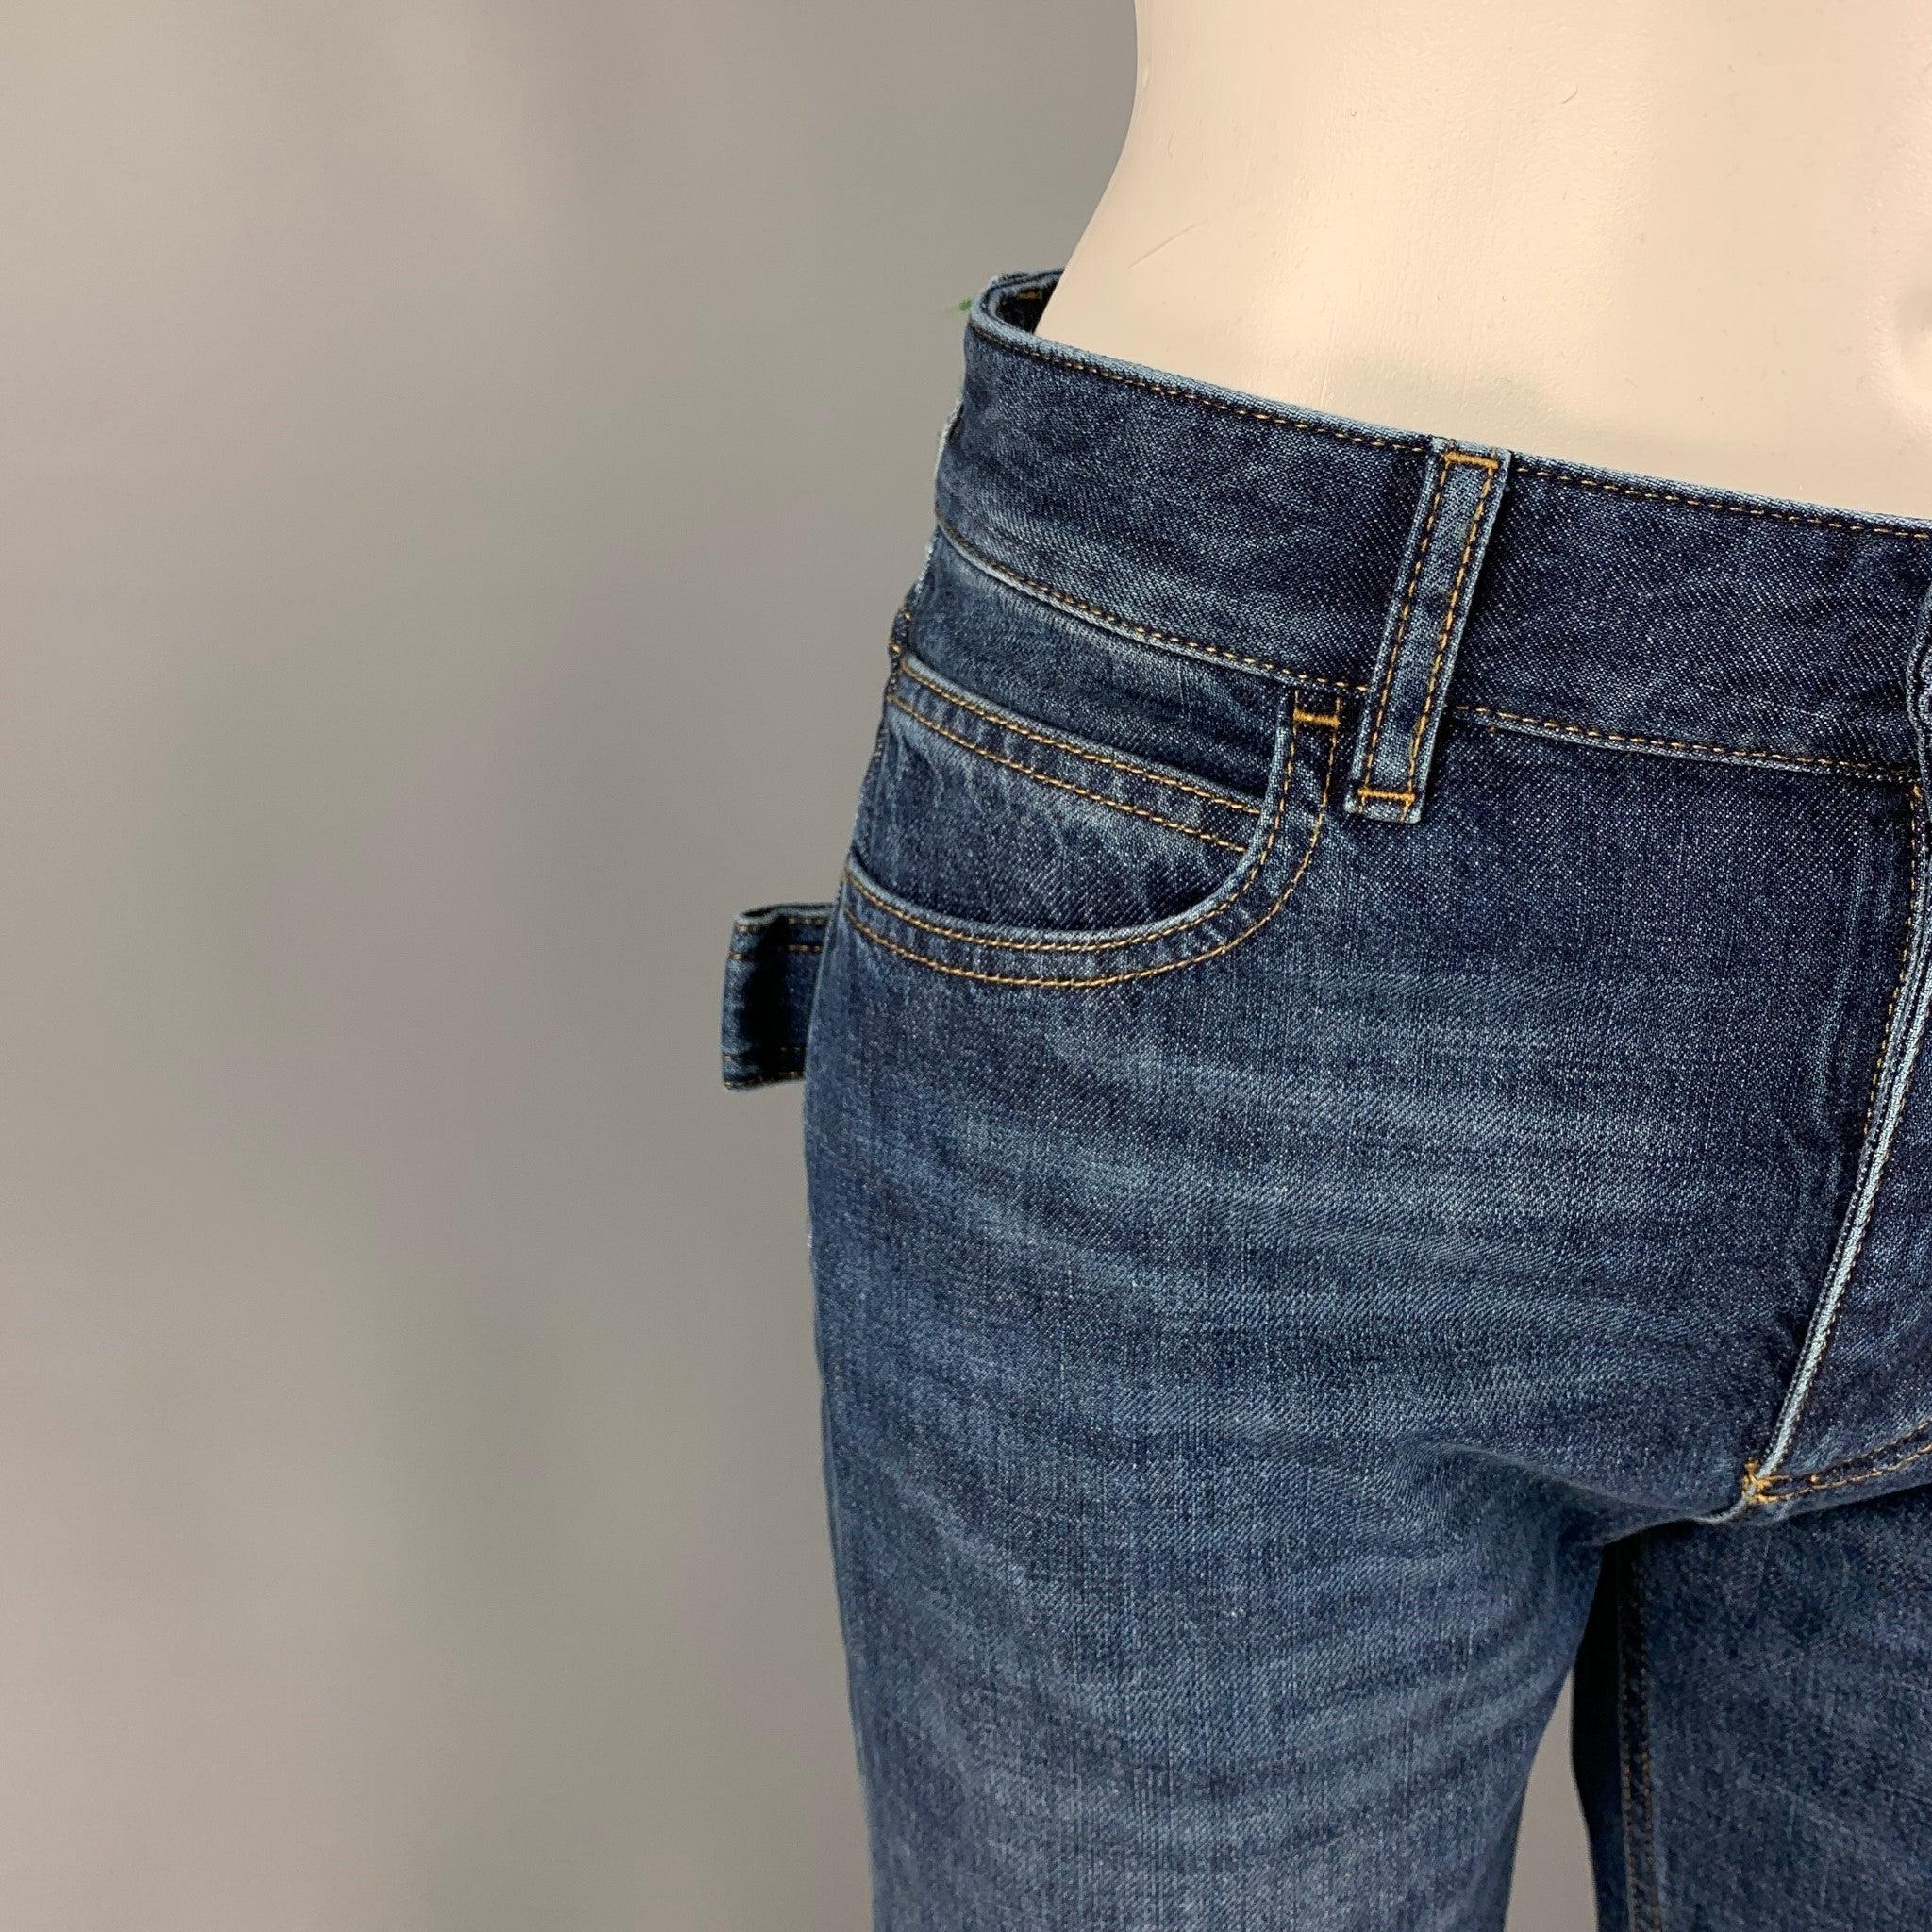 BOTTEGA VENETA jeans comes in a blue washed cotton featuring a mid-rise waist, flared leg design, contrast stitching, green trim, and a button fly closure. Made in Italy.
Excellent
Pre-Owned Condition. 

Marked:   36 

Measurements: 
  Waist: 30